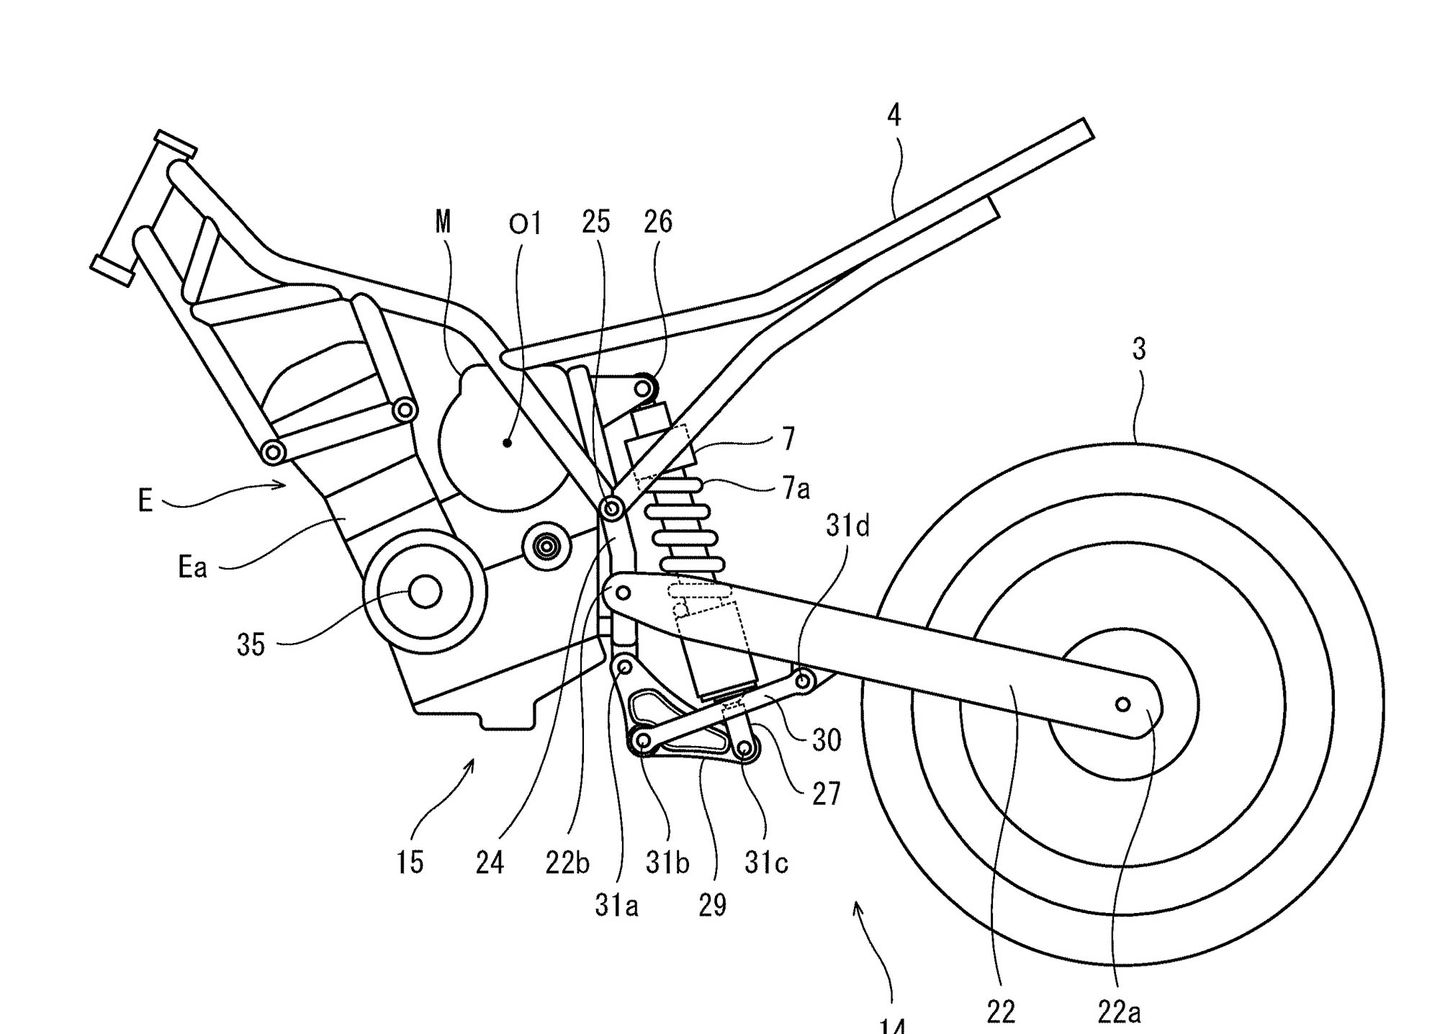 A view of the new patents surrounding Kawasaki's new hybrid motorcycle - namely, that it will be a system that can be included in many of the current lineup bikes